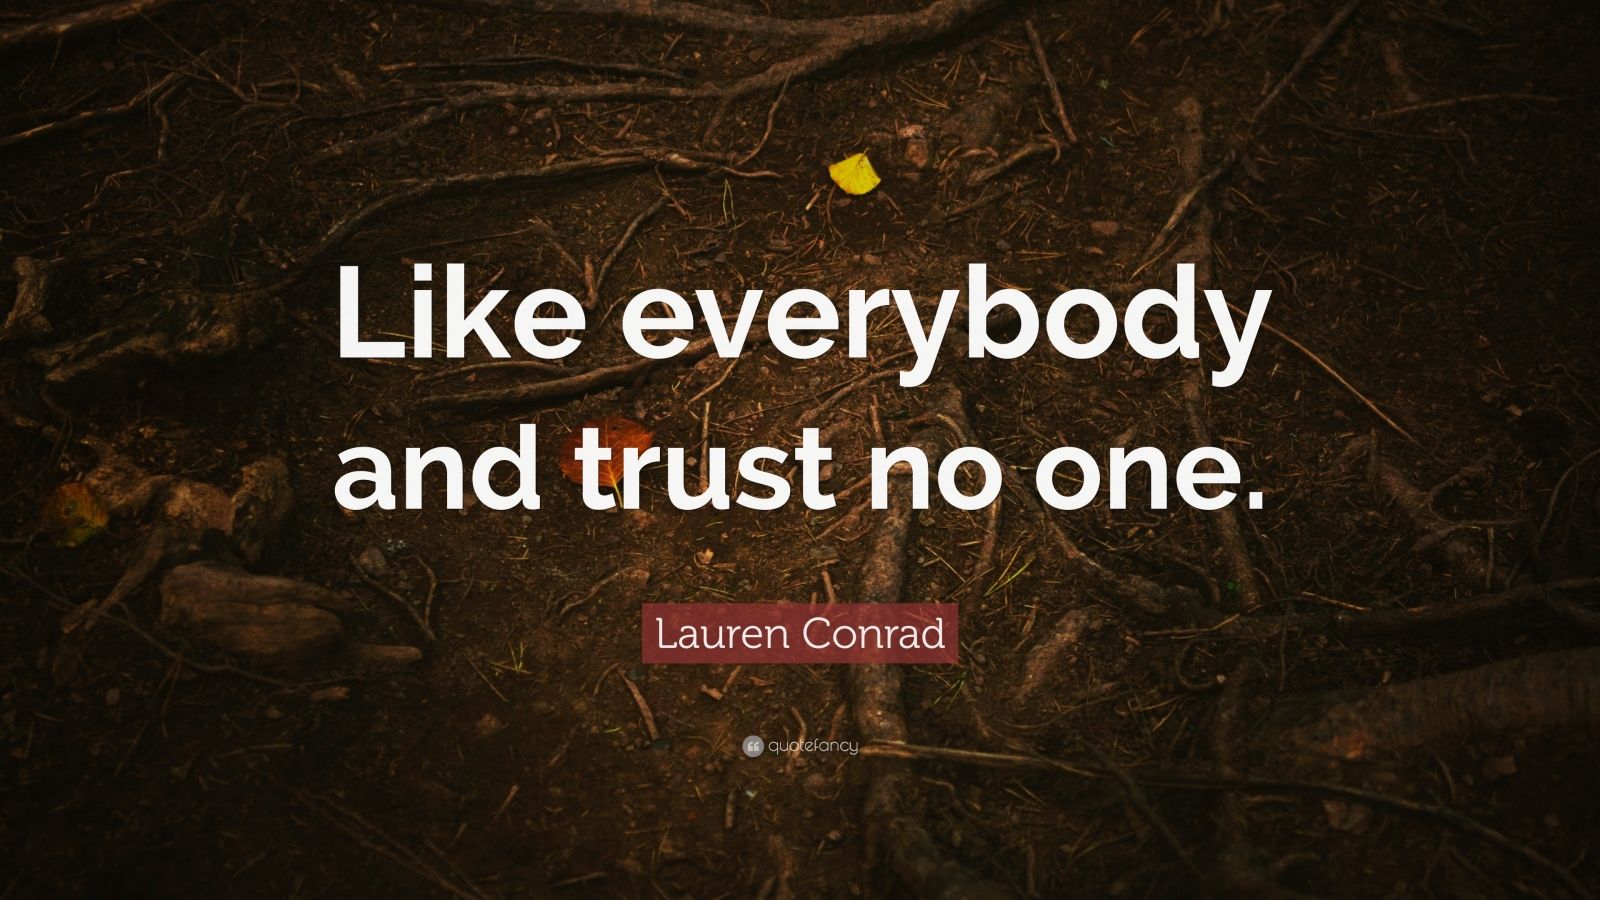 Lauren Conrad Quote: “Like everybody and trust no one.” (9 wallpapers ...